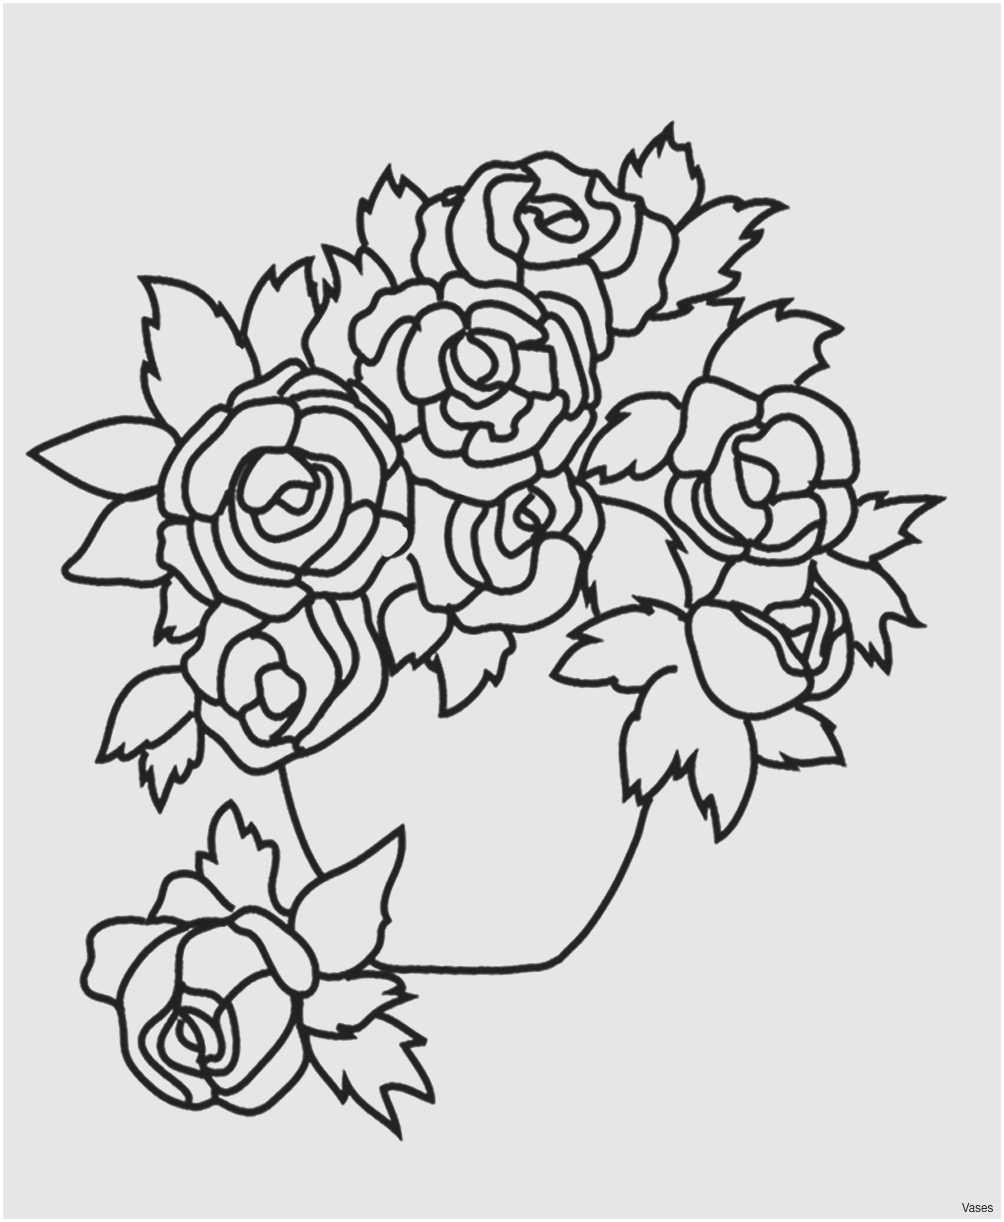 21 Lovable 3 Vase Centerpiece Ideas 2024 free download 3 vase centerpiece ideas of 16 lovely flowers in a tall white vase bogekompresorturkiye com pertaining to vases flowers in vase coloring pages a flower top i 0d flowers awesome